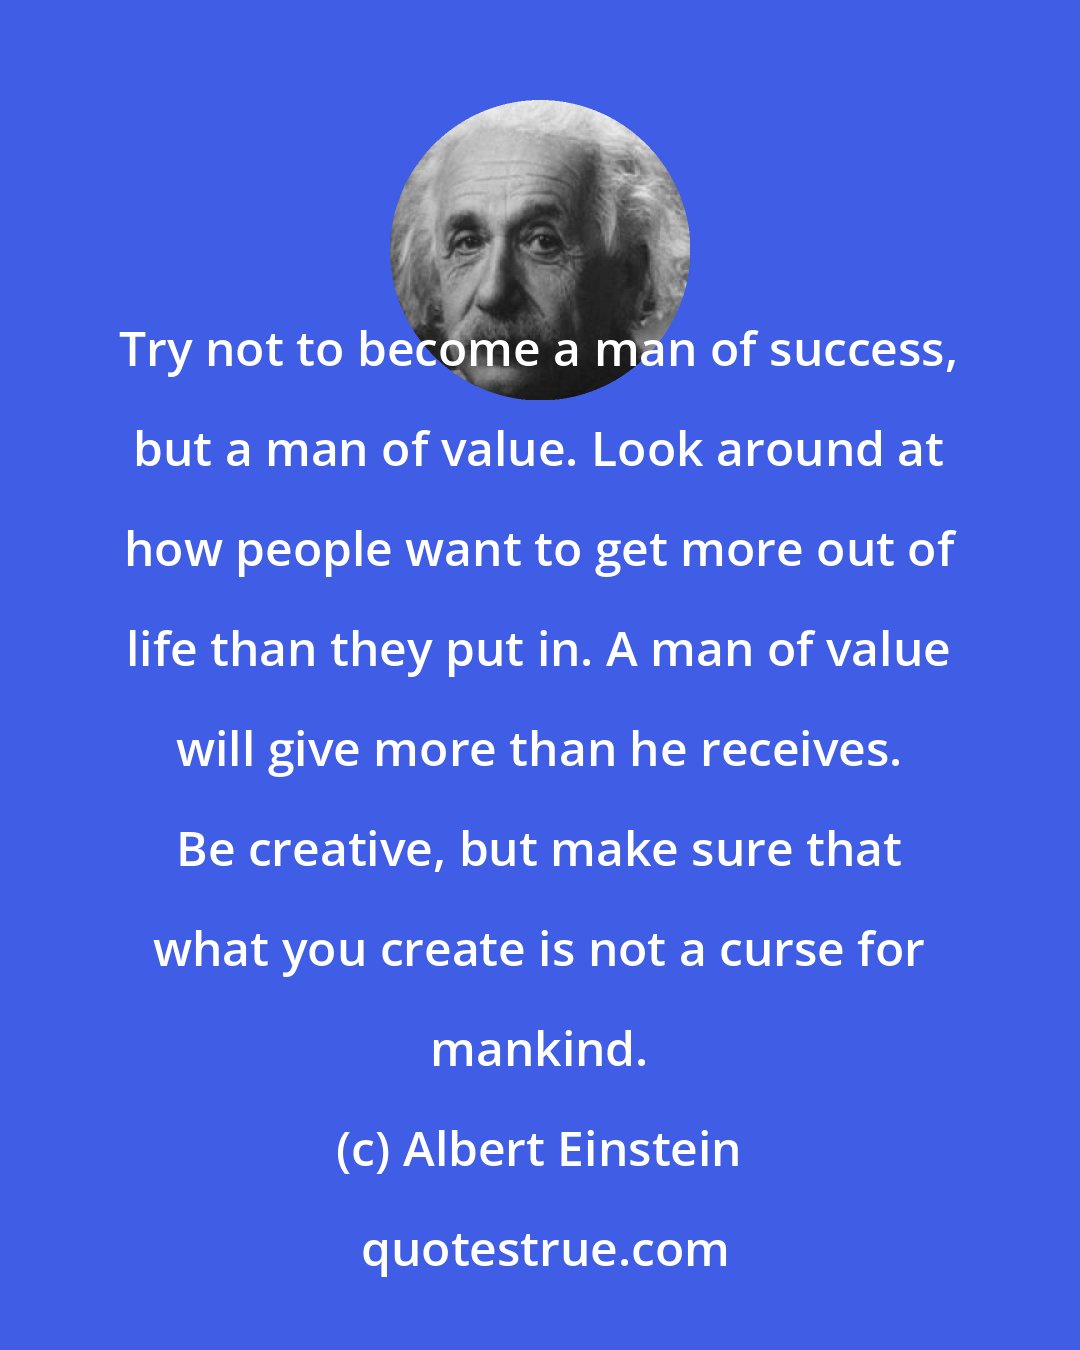 Albert Einstein: Try not to become a man of success, but a man of value. Look around at how people want to get more out of life than they put in. A man of value will give more than he receives. Be creative, but make sure that what you create is not a curse for mankind.